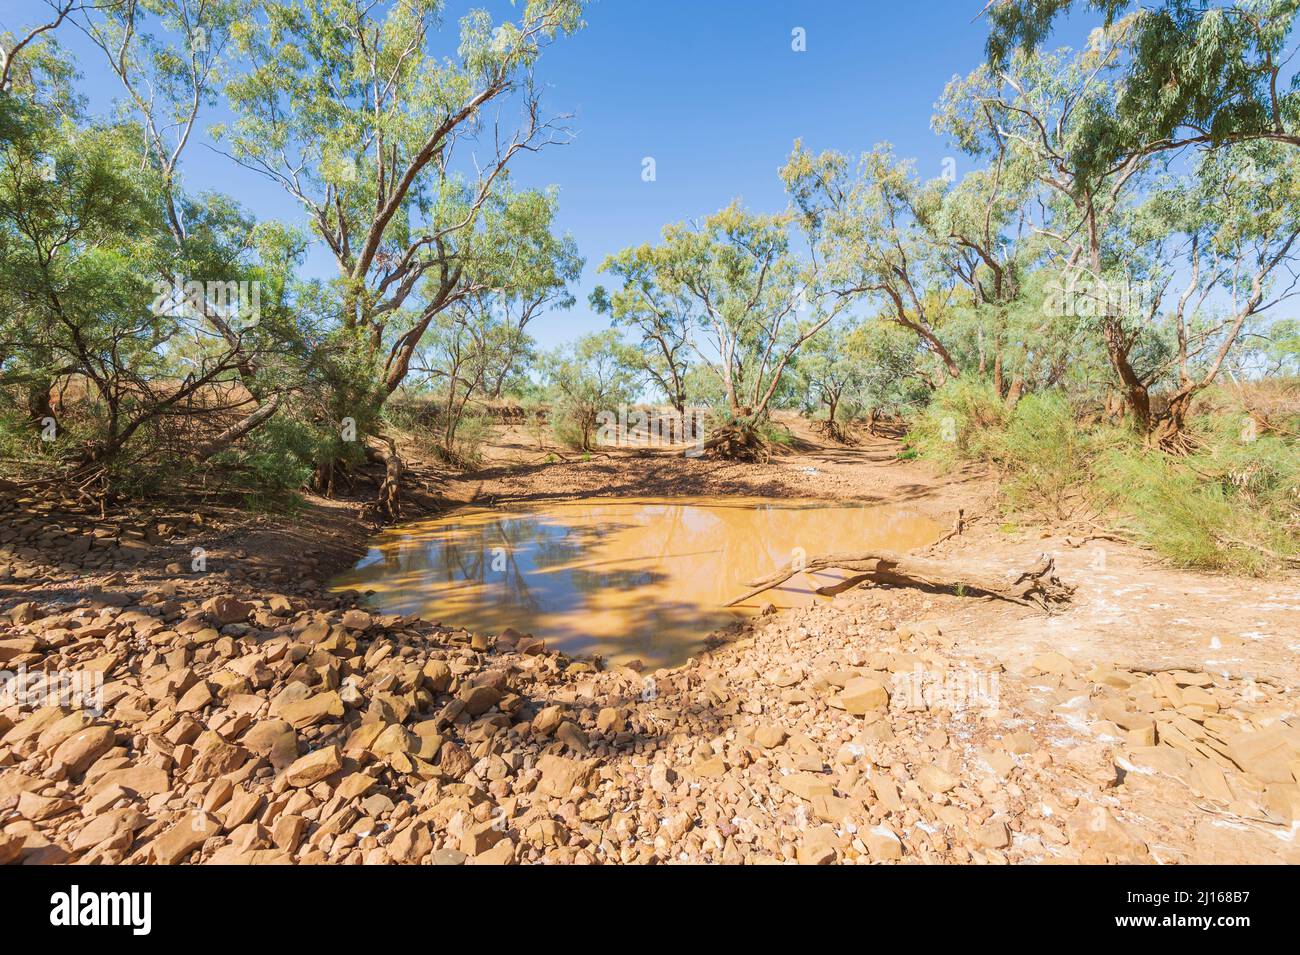 Stone Overshots built at Dagworth Station around 1890 to prevent precious waterholes from drying up, Central Queensland, QLD, Australia Stock Photo